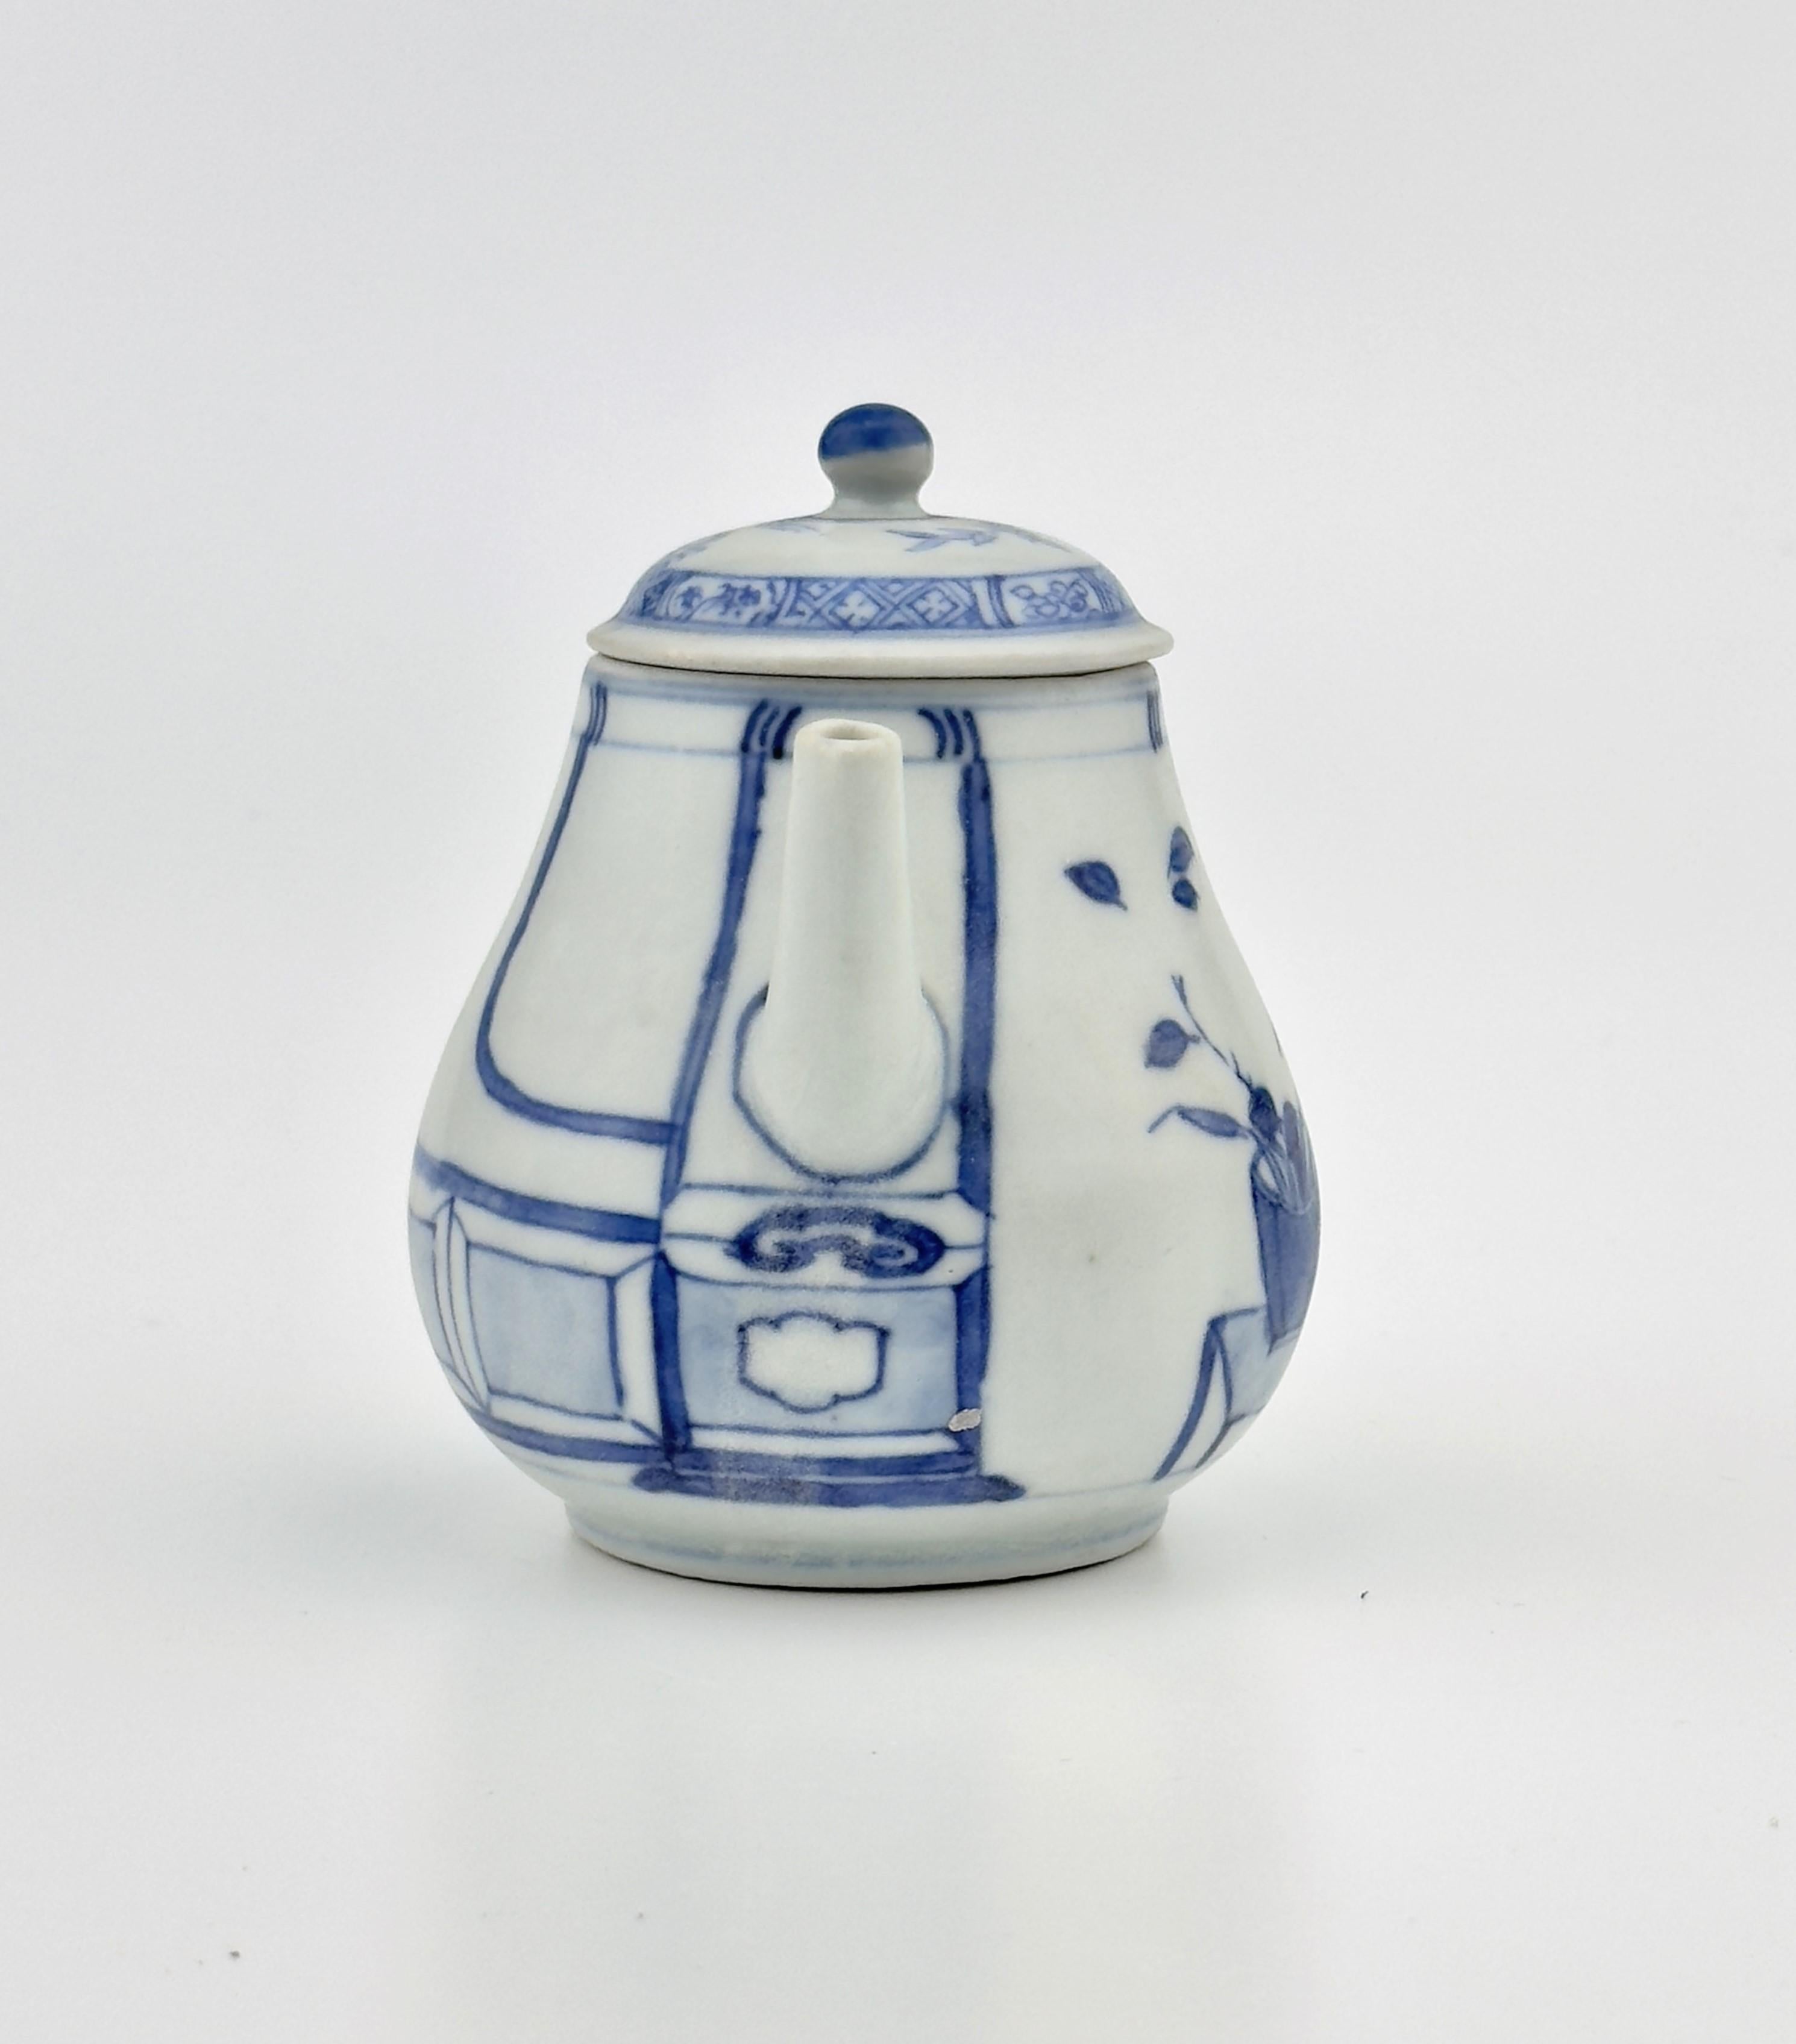 Chinoiserie 'Imari Pavilion' Pattern Blue And White Teapot C 1725, Qing Dynasty, Yongzheng For Sale